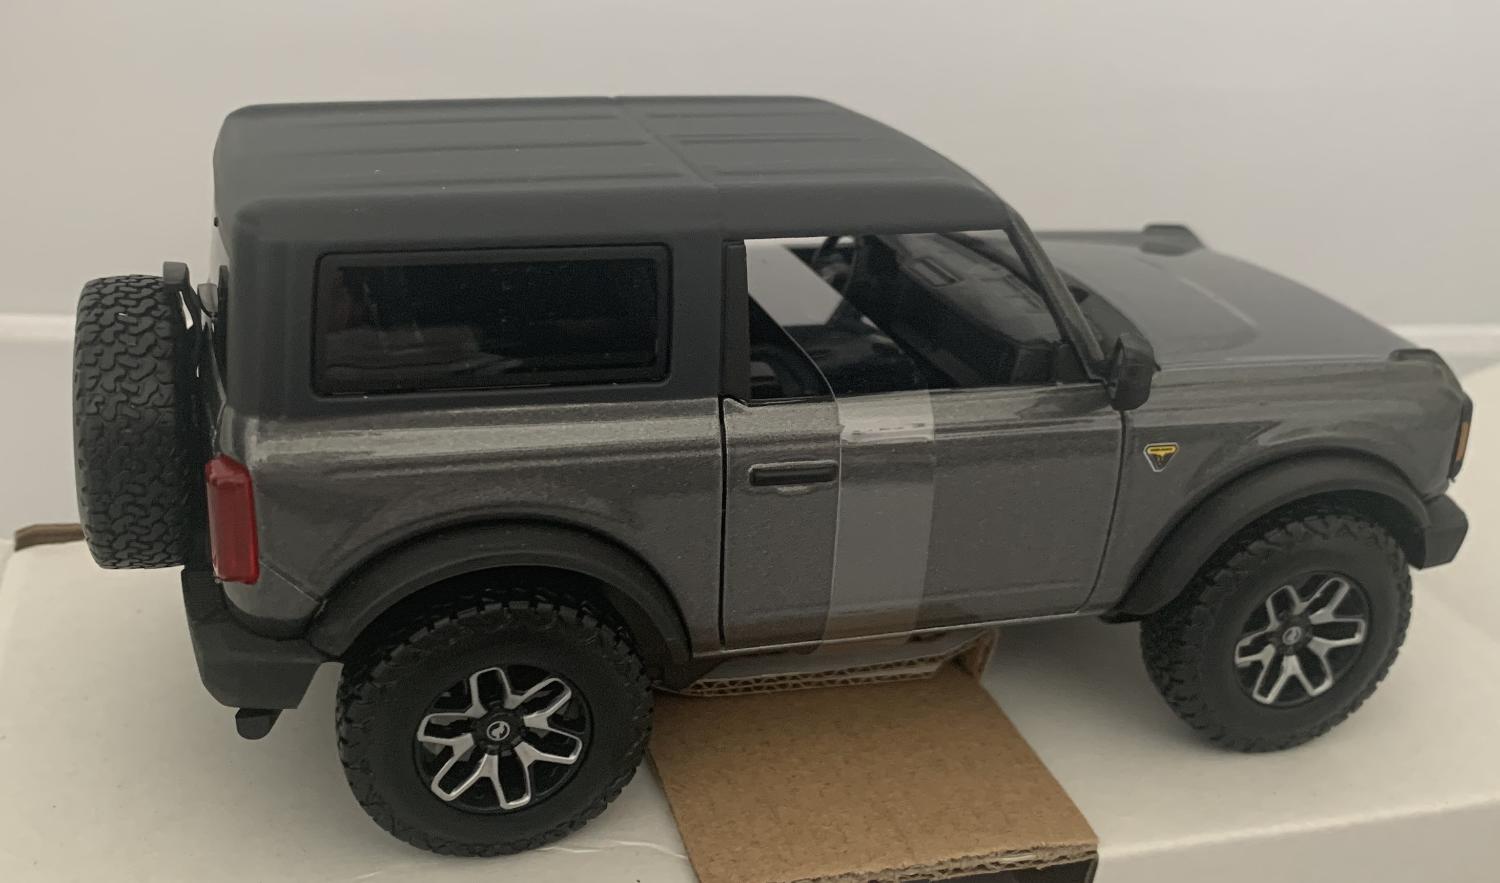 An excellent scale model of a Ford Bronco Badlands decorated in grey and black roof with silver and black wheels